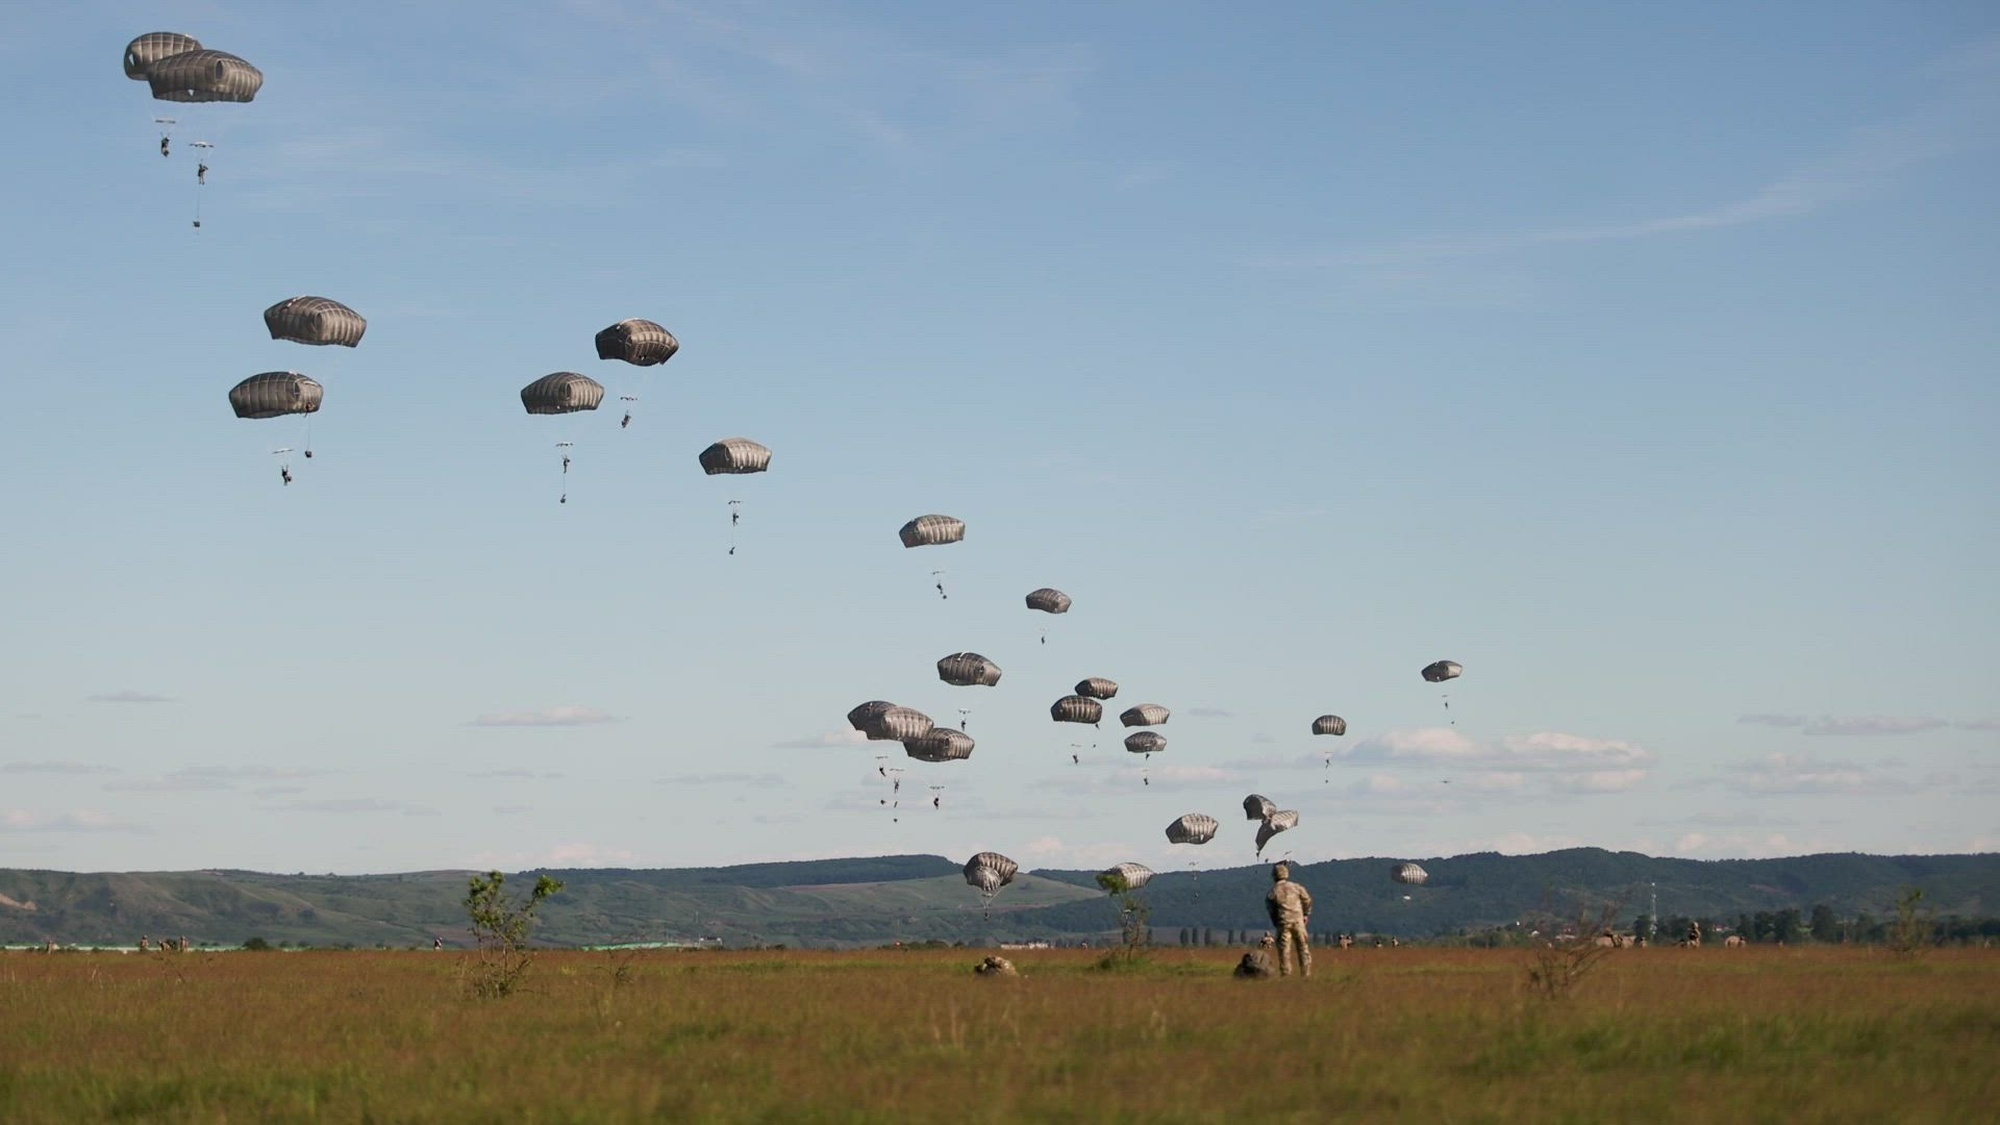 U.S. Army paratroopers, assigned to 82nd Airborne Division, execute Joint Force Entries as part of a multinational exercise, Swift Response 24, at Luna and Cincu, Romania, May 13-15, 2024. Swift Response, an annual exercise led by the U.S. Army Europe, focuses on improving the ability of allied airborne forces to rapidly and effectively manage crisis situations, operating seamlessly as a cohesive multinational unit. (U.S. Army video by Spc. Ashley Xie)